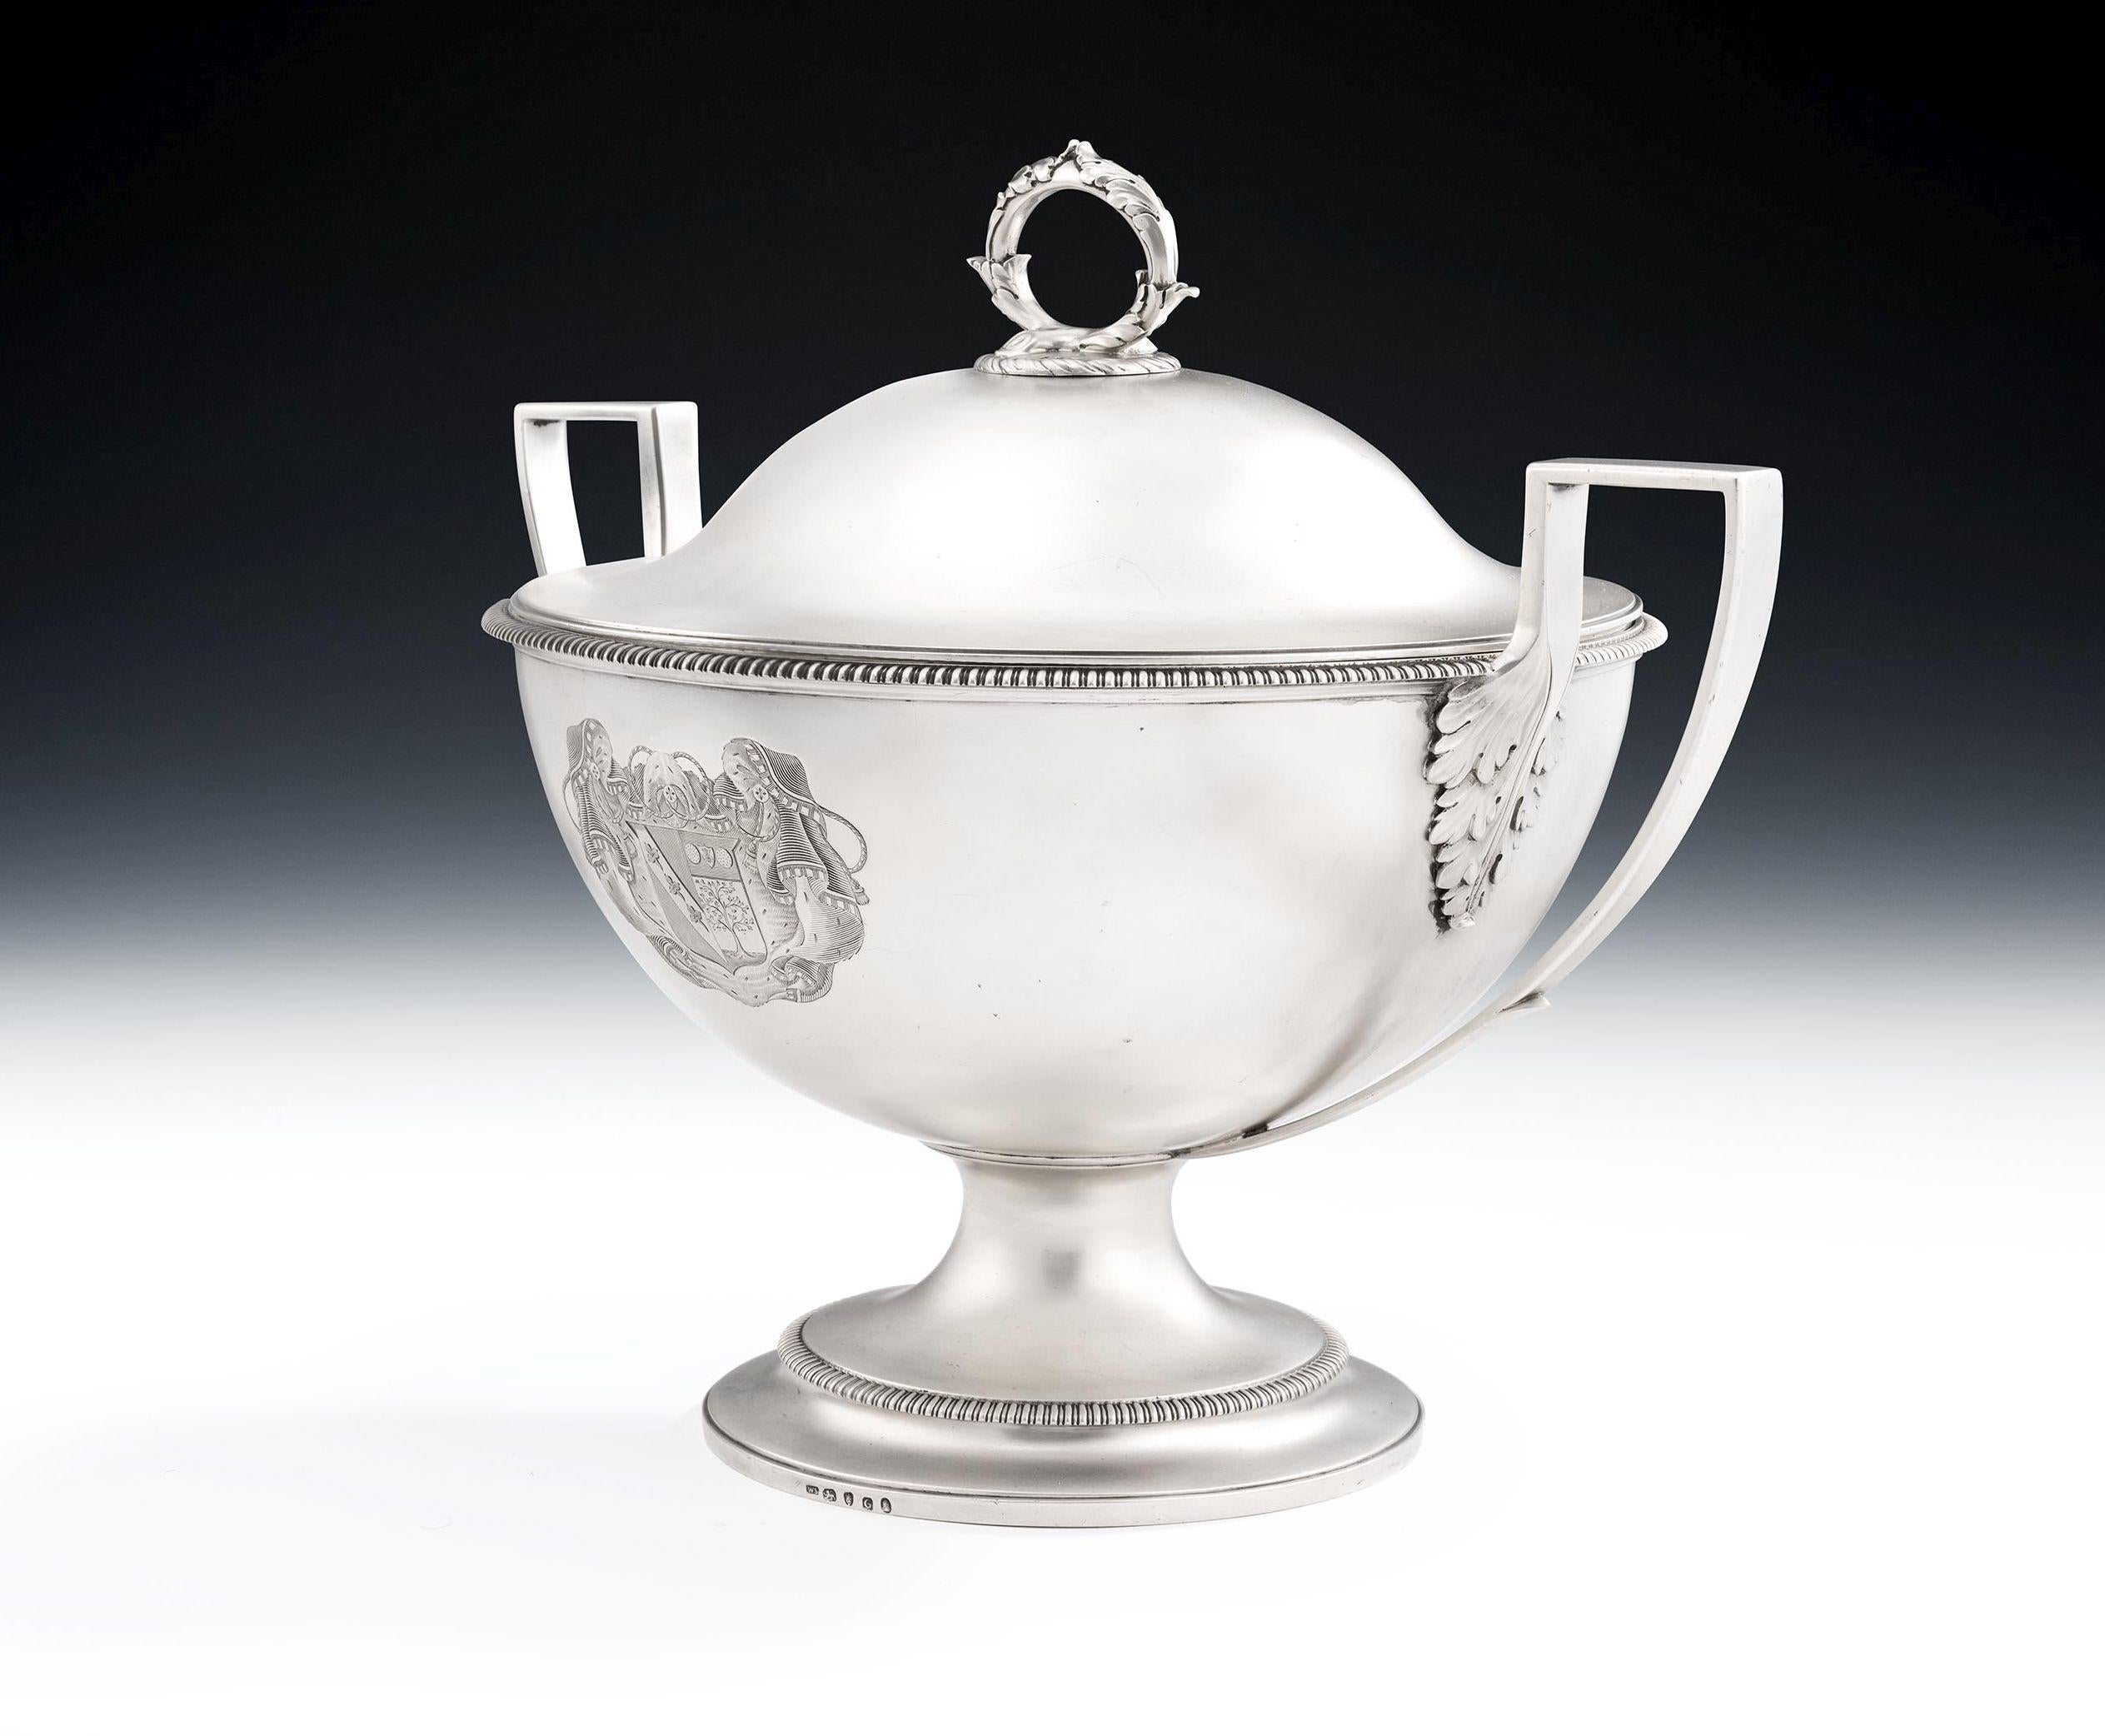 An exceptional George III Soup Tureen made in London in 1802 by William Stroud.

This exceptional piece stands on a circular, stepped, spreading foot decorated with a gadrooned band.  The main body is also of a circular form and rises to an everted